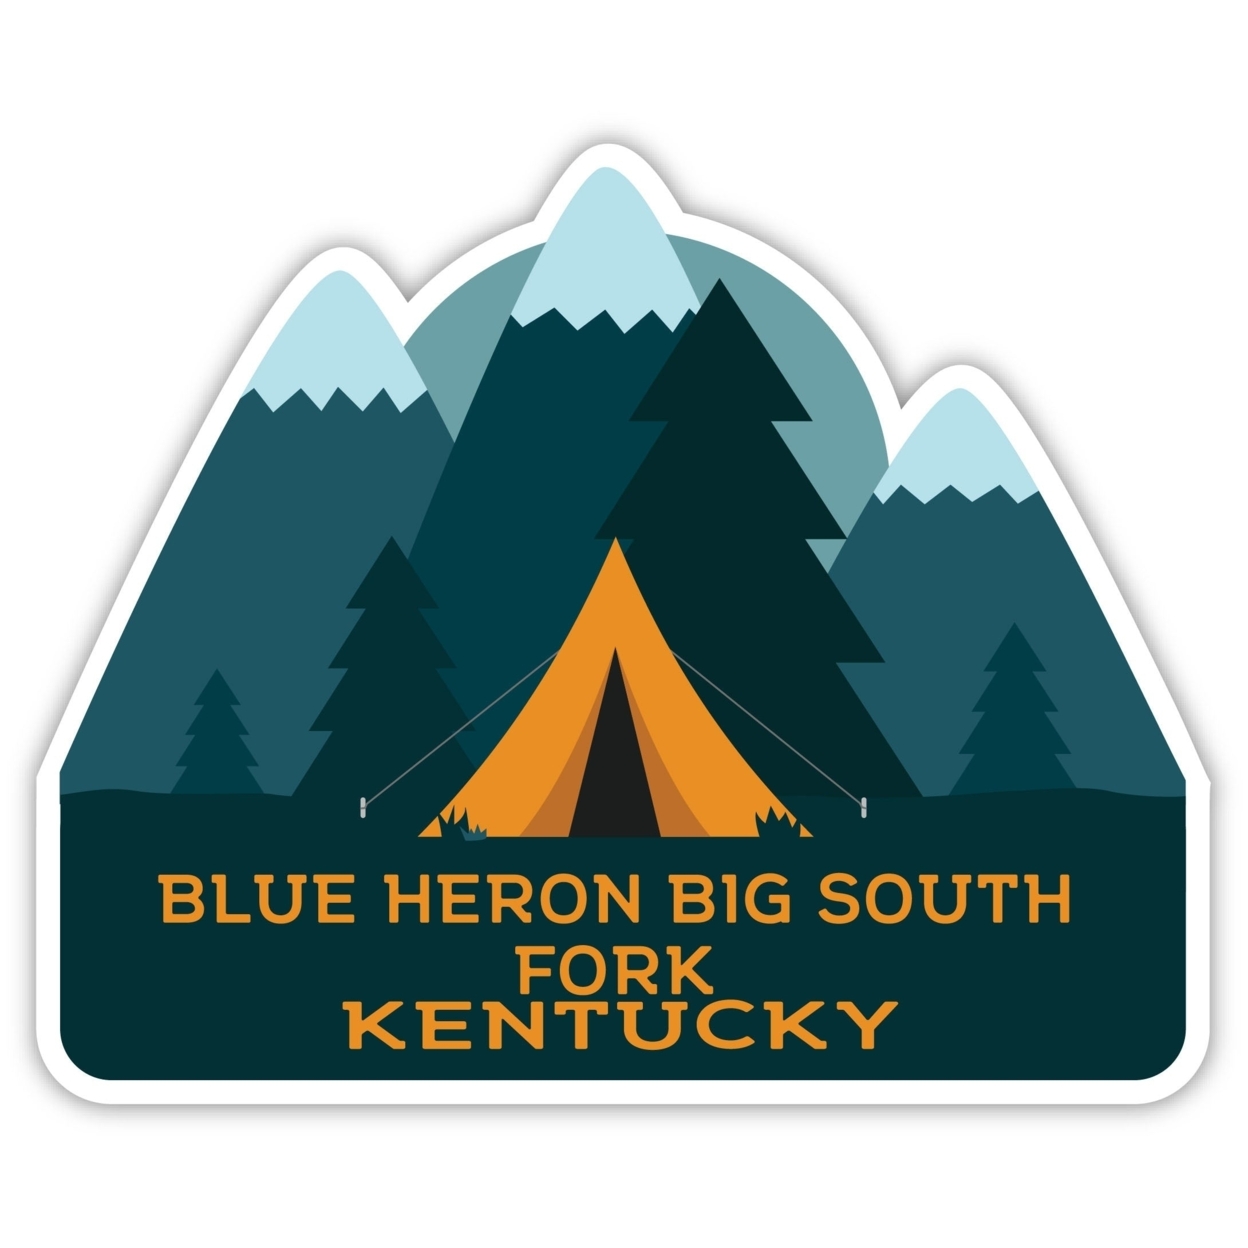 Blue Heron Big South Fork Kentucky Souvenir Decorative Stickers (Choose Theme And Size) - 4-Pack, 6-Inch, Tent